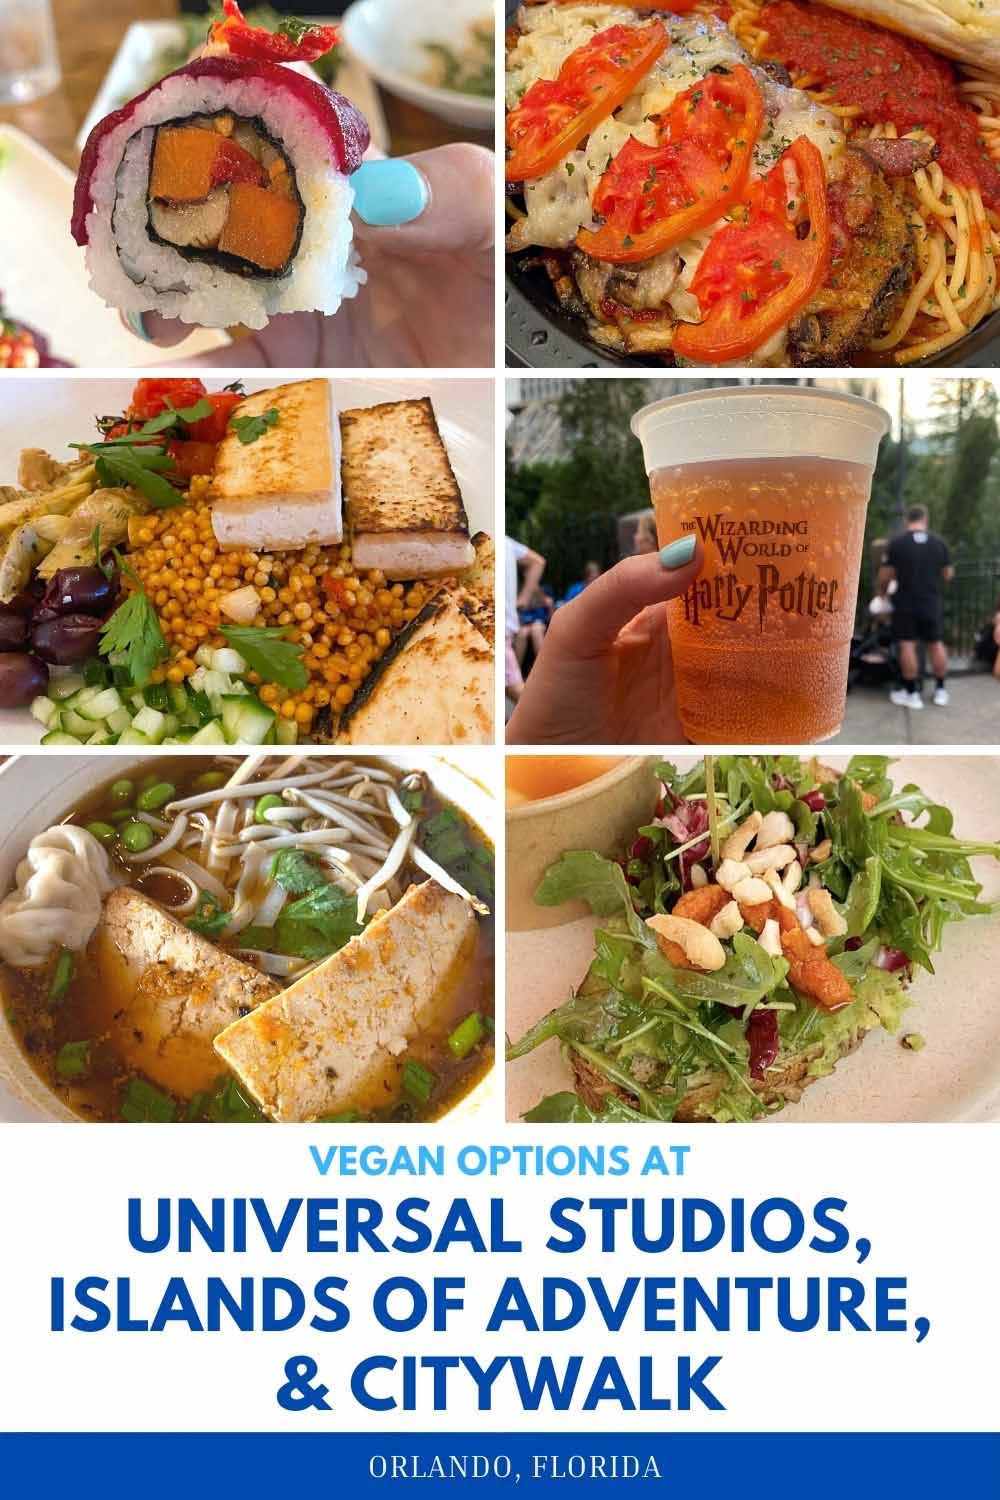 image collage showing vegan options at Universal Studios, Islands of Adventure, and CityWalk in Orlando